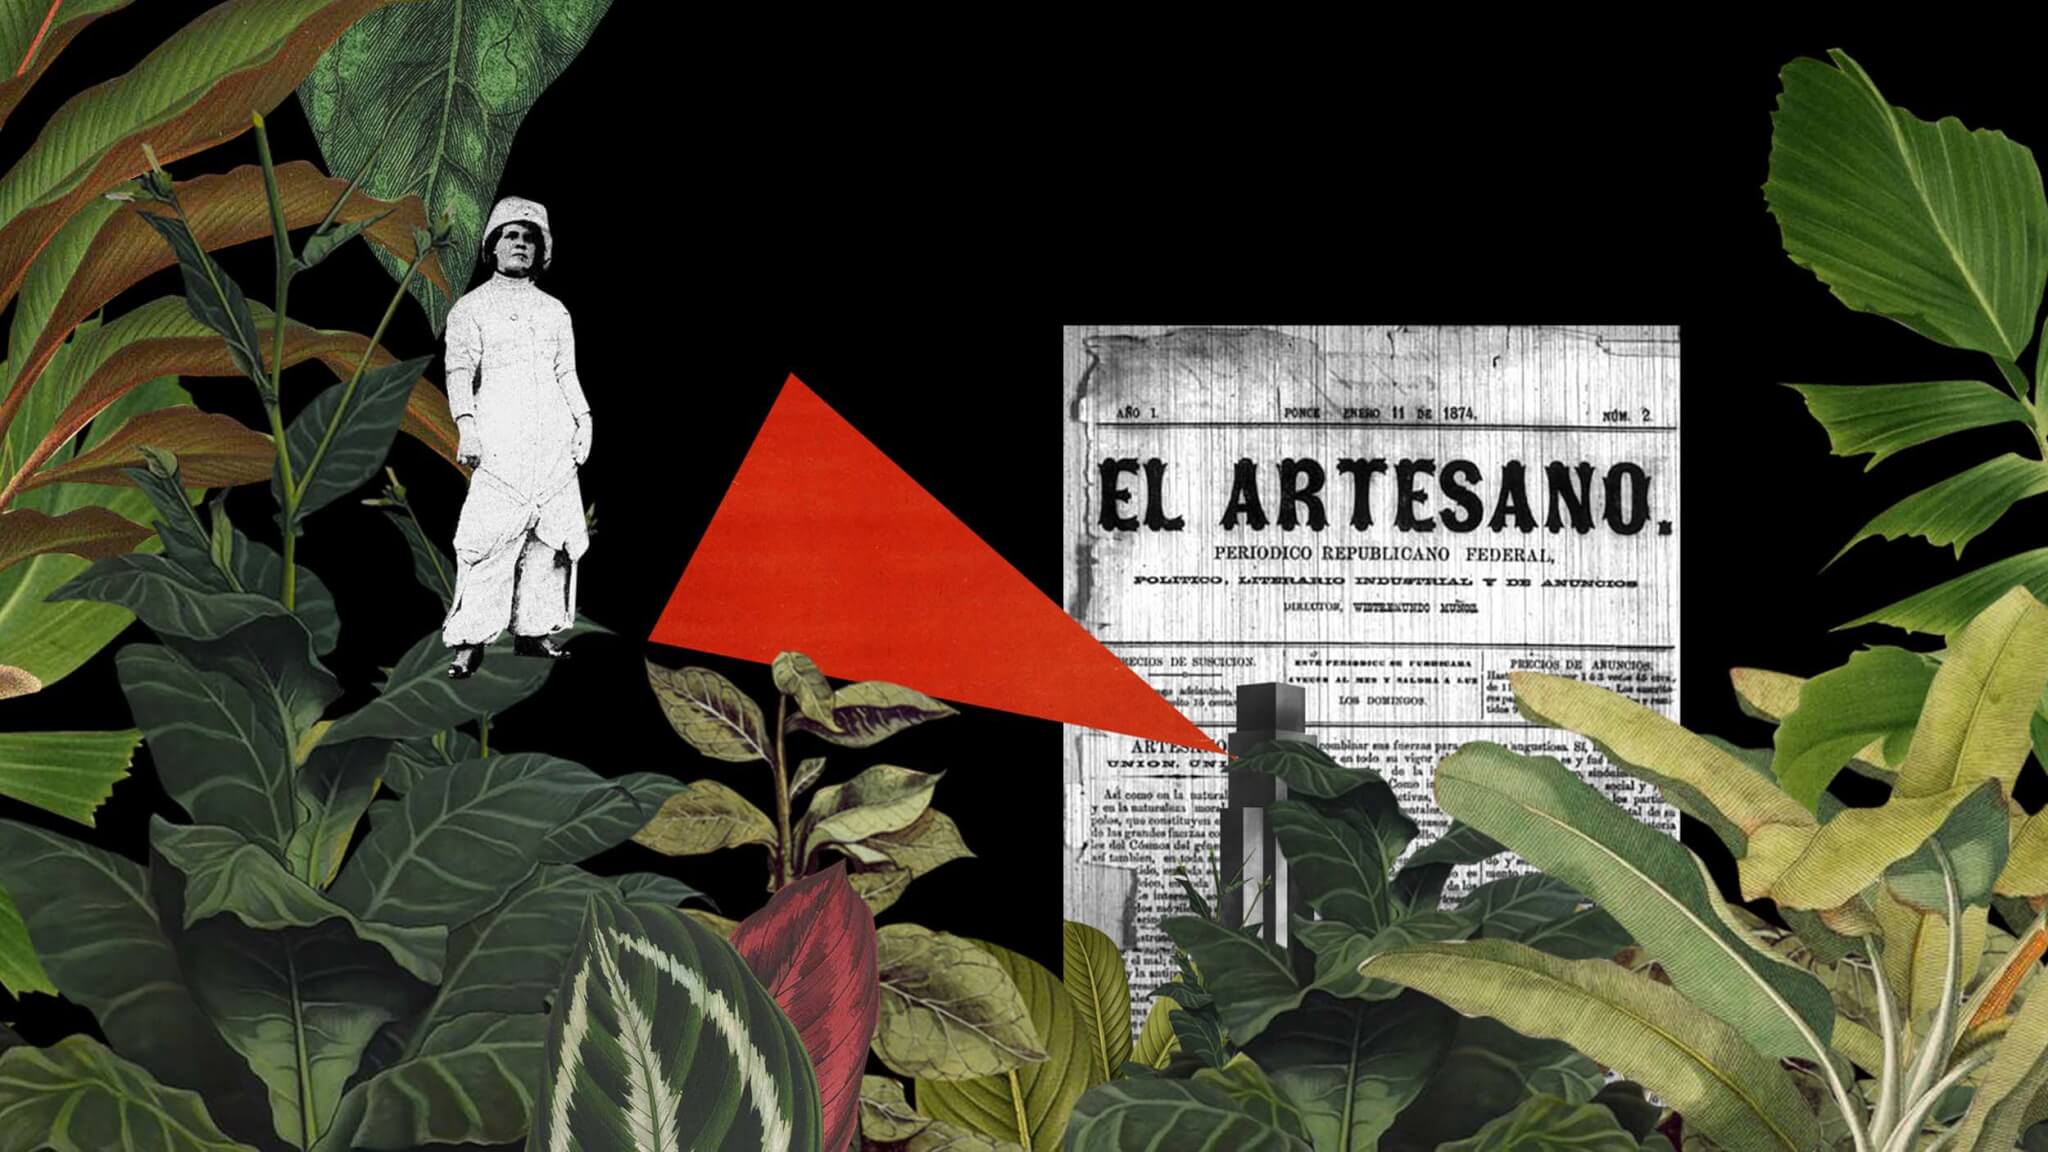 tropical plants with red flag and newspaper